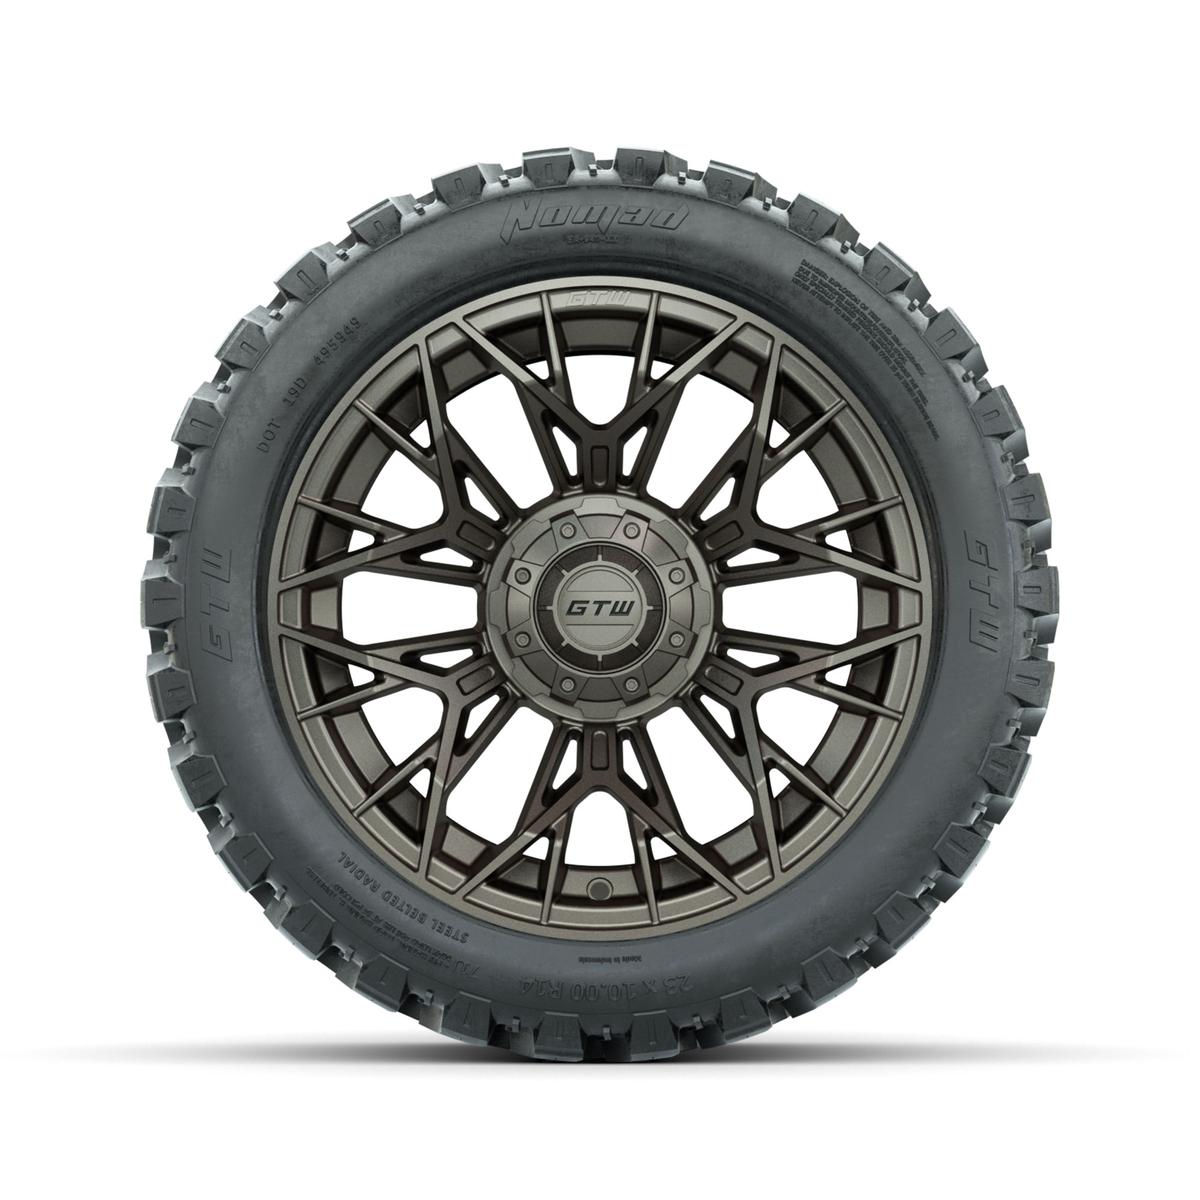 Set of (4) 14 in GTW® Stellar Matte Bronze Wheels with 23x10-R14 Nomad All-Terrain Tires